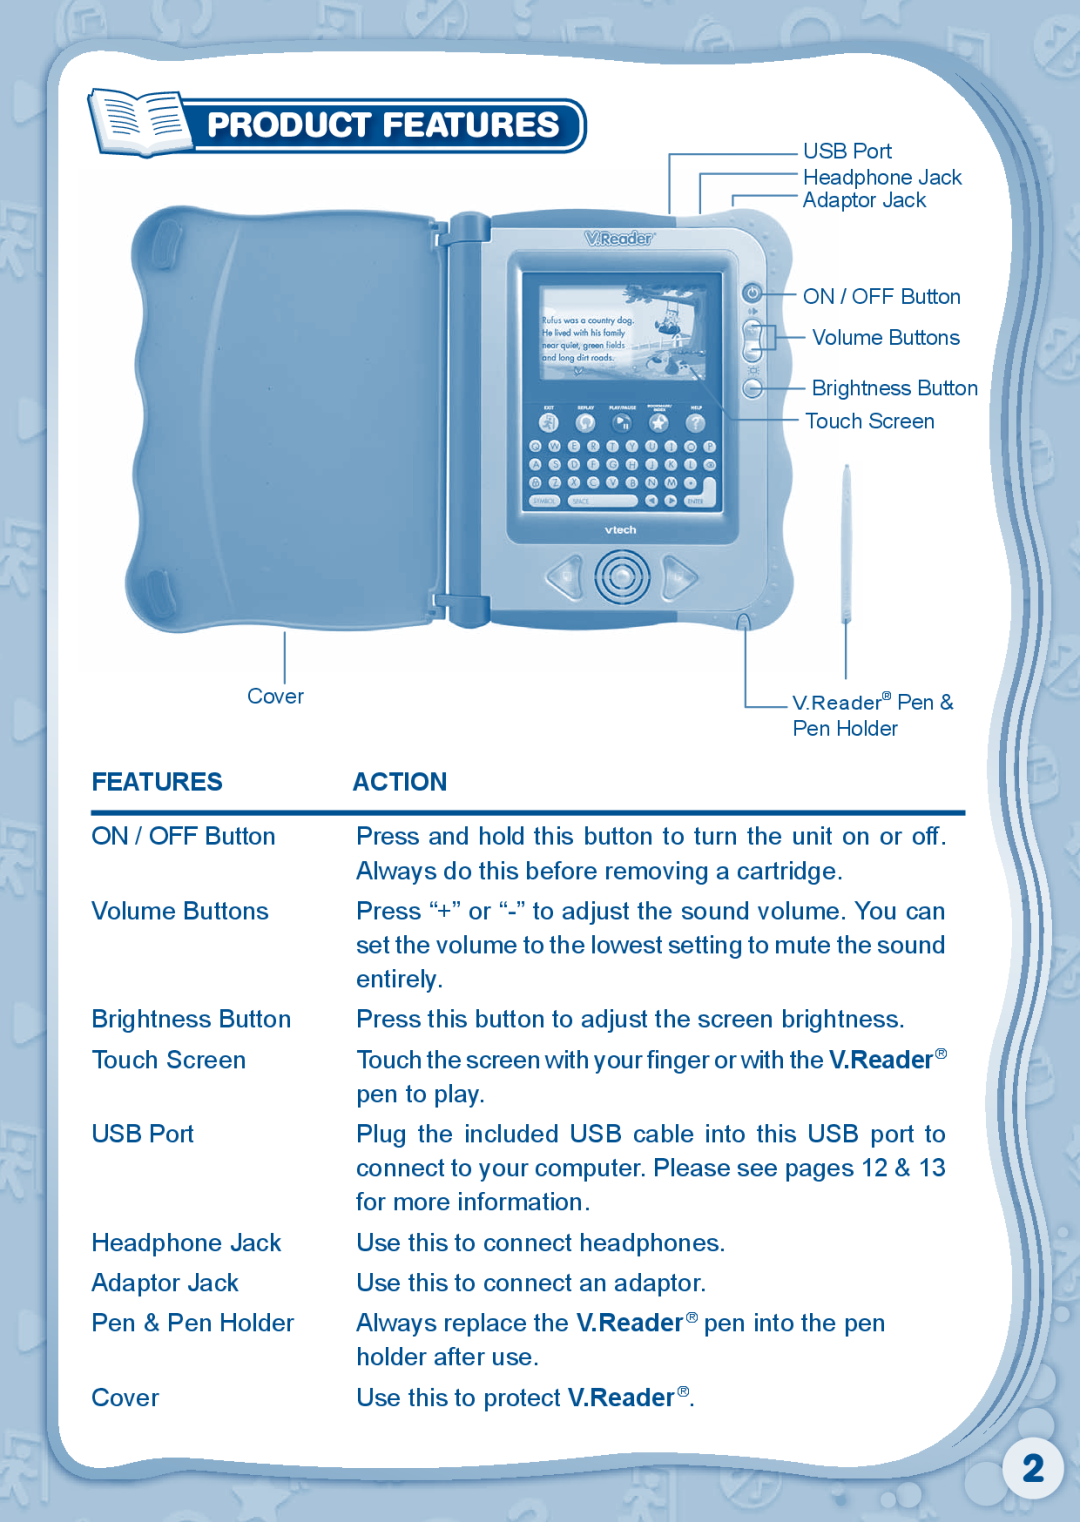 VTech 80-115610 user manual Product Features, Action 